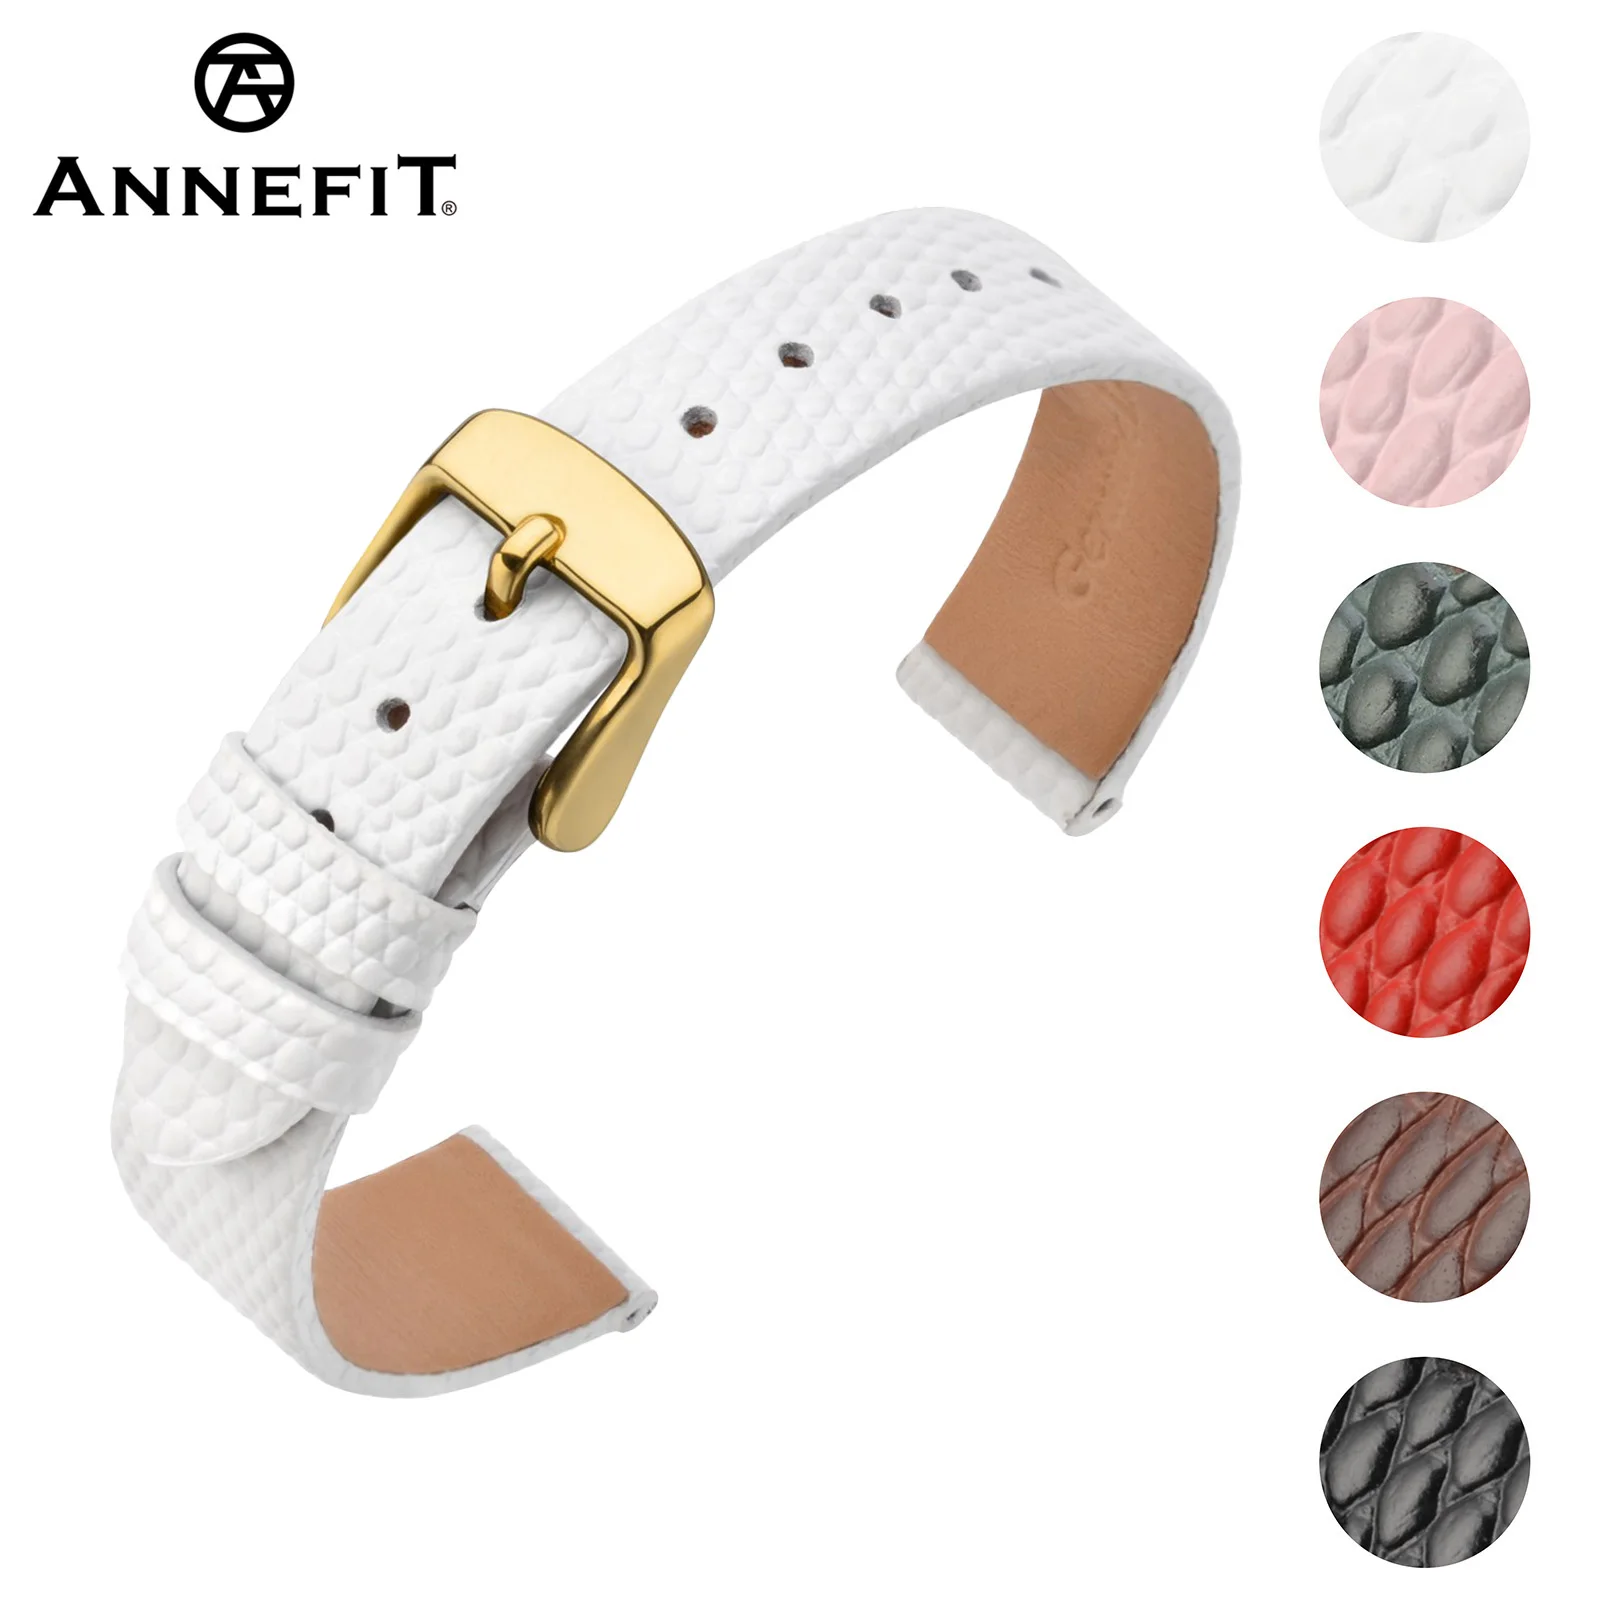 

ANNEFIT Leather Watch Band for Women 12mm 14mm 16mm 18mm 20mm Lizard Grain Slim Thin Replacement Strap Stainless Steel Buckle